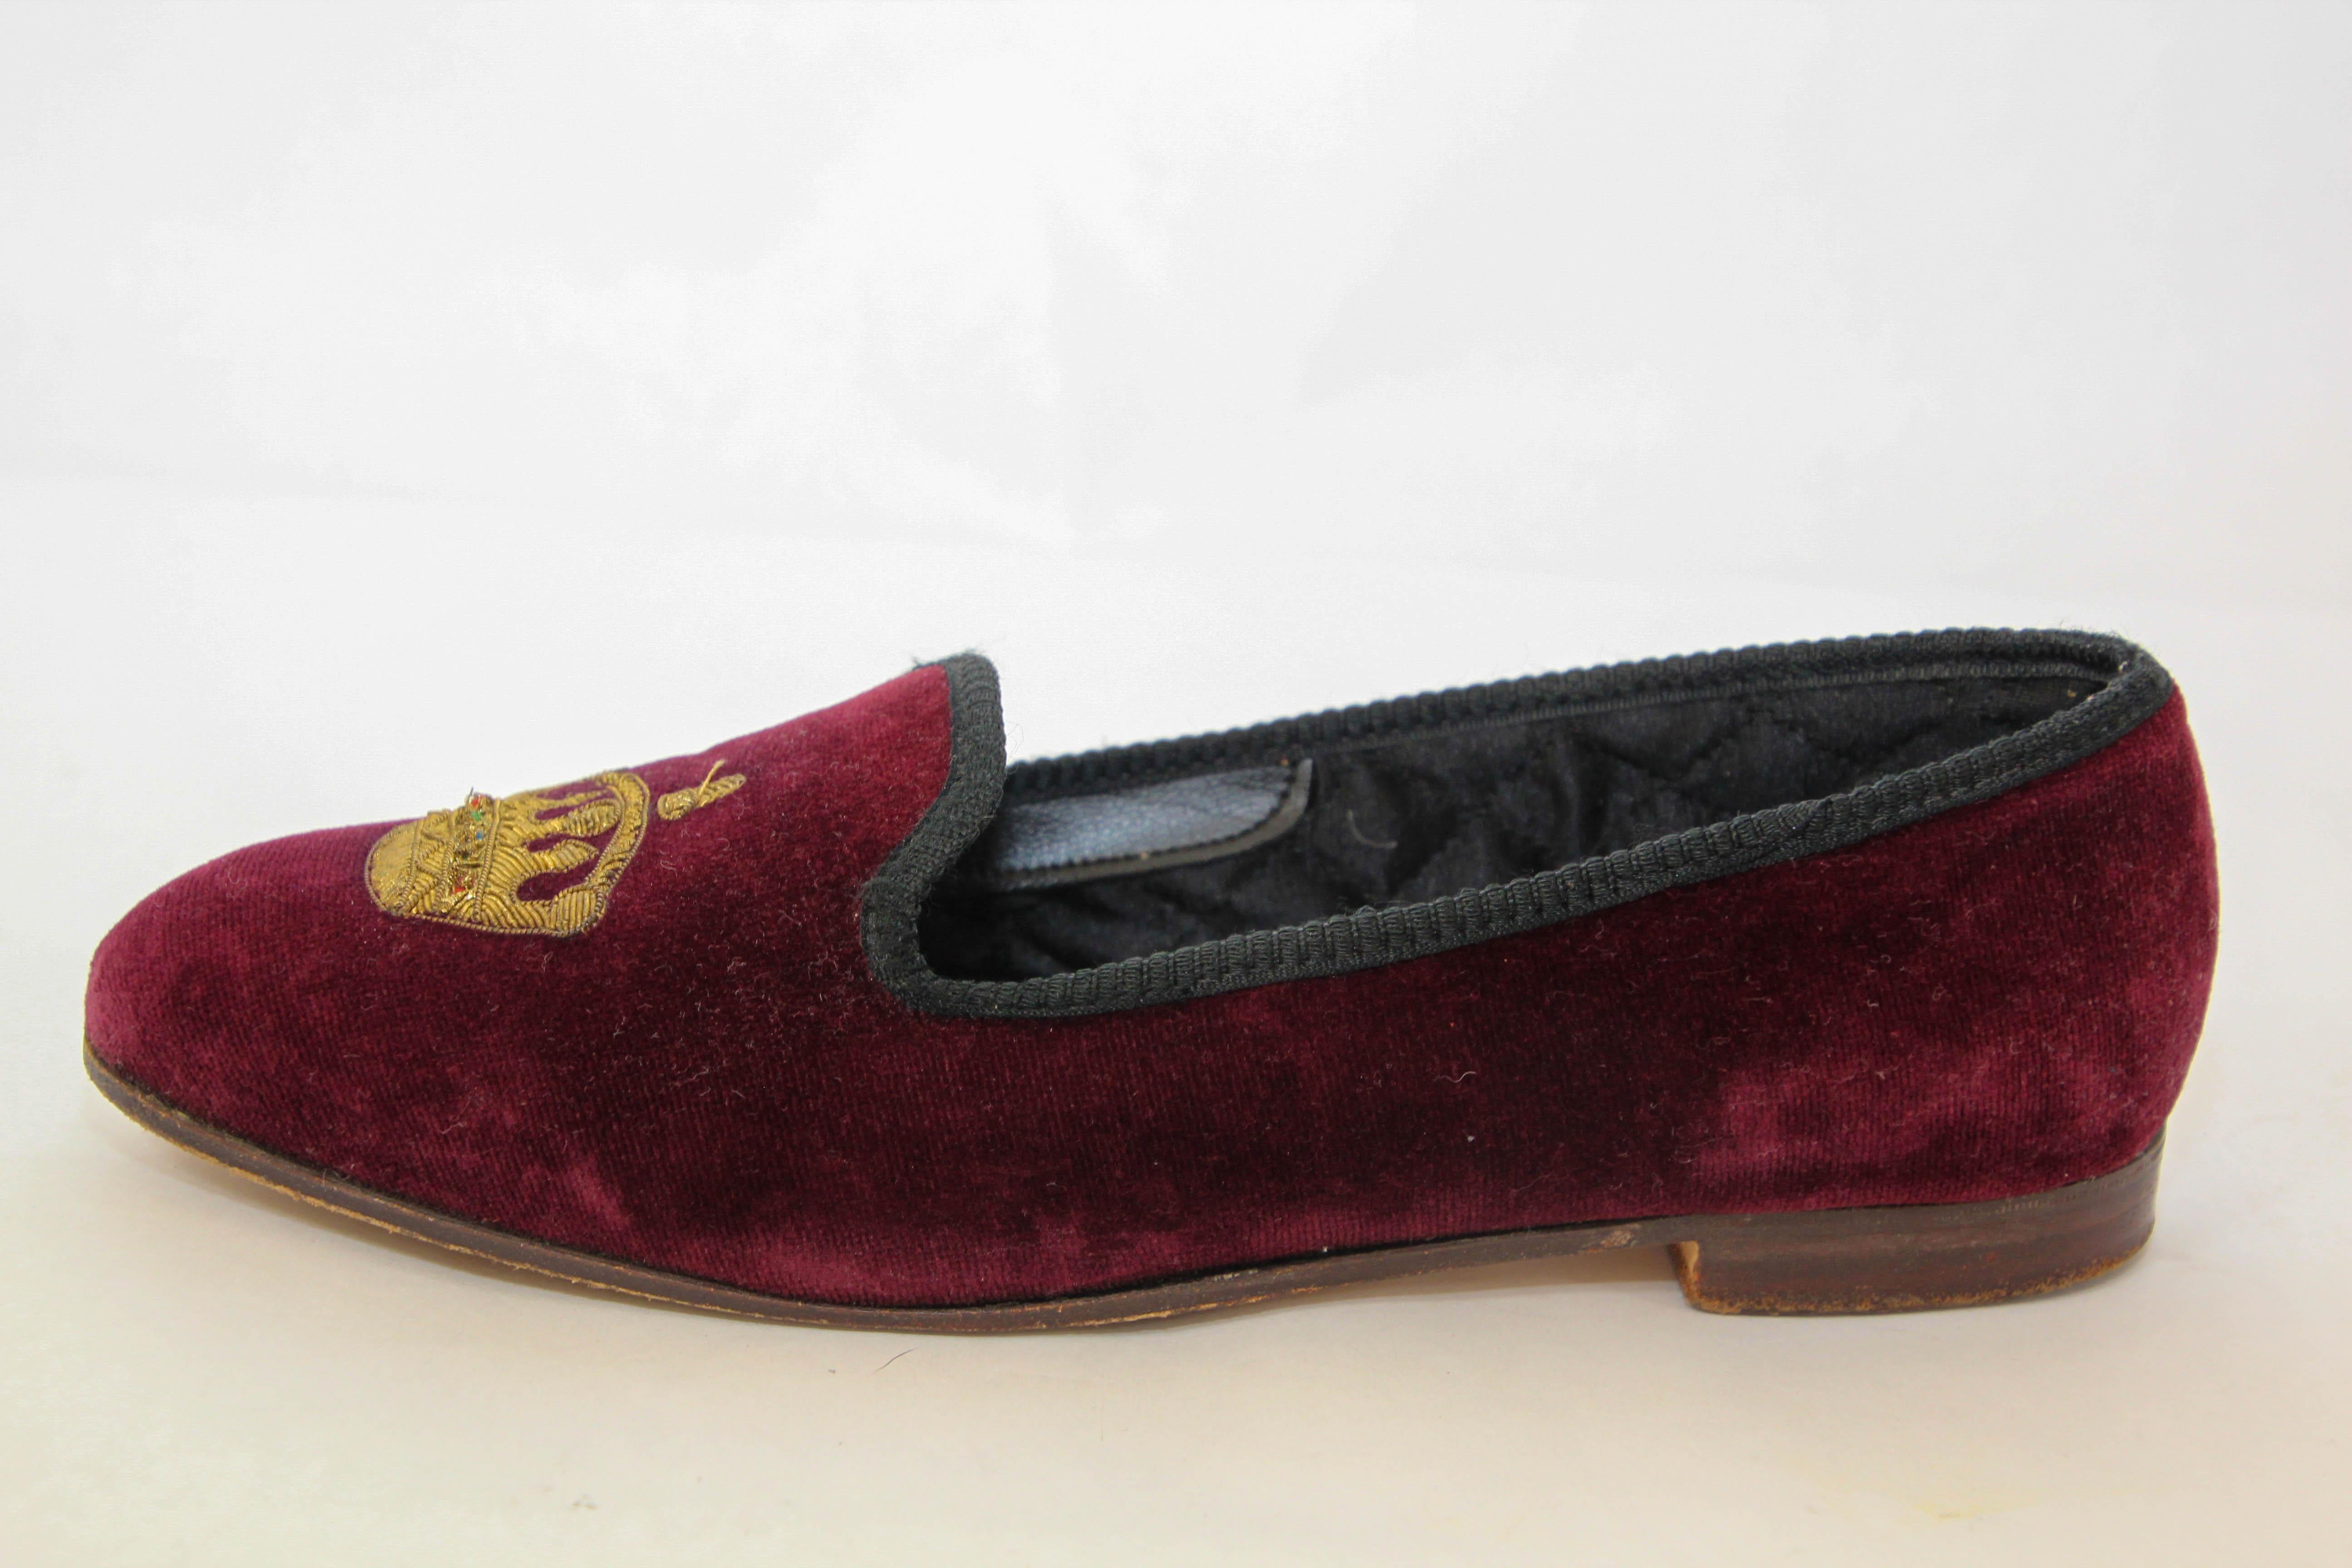 British Crown Embroidery Velvet Burgundy Loafers Slip On Size 6.5 For Sale 8